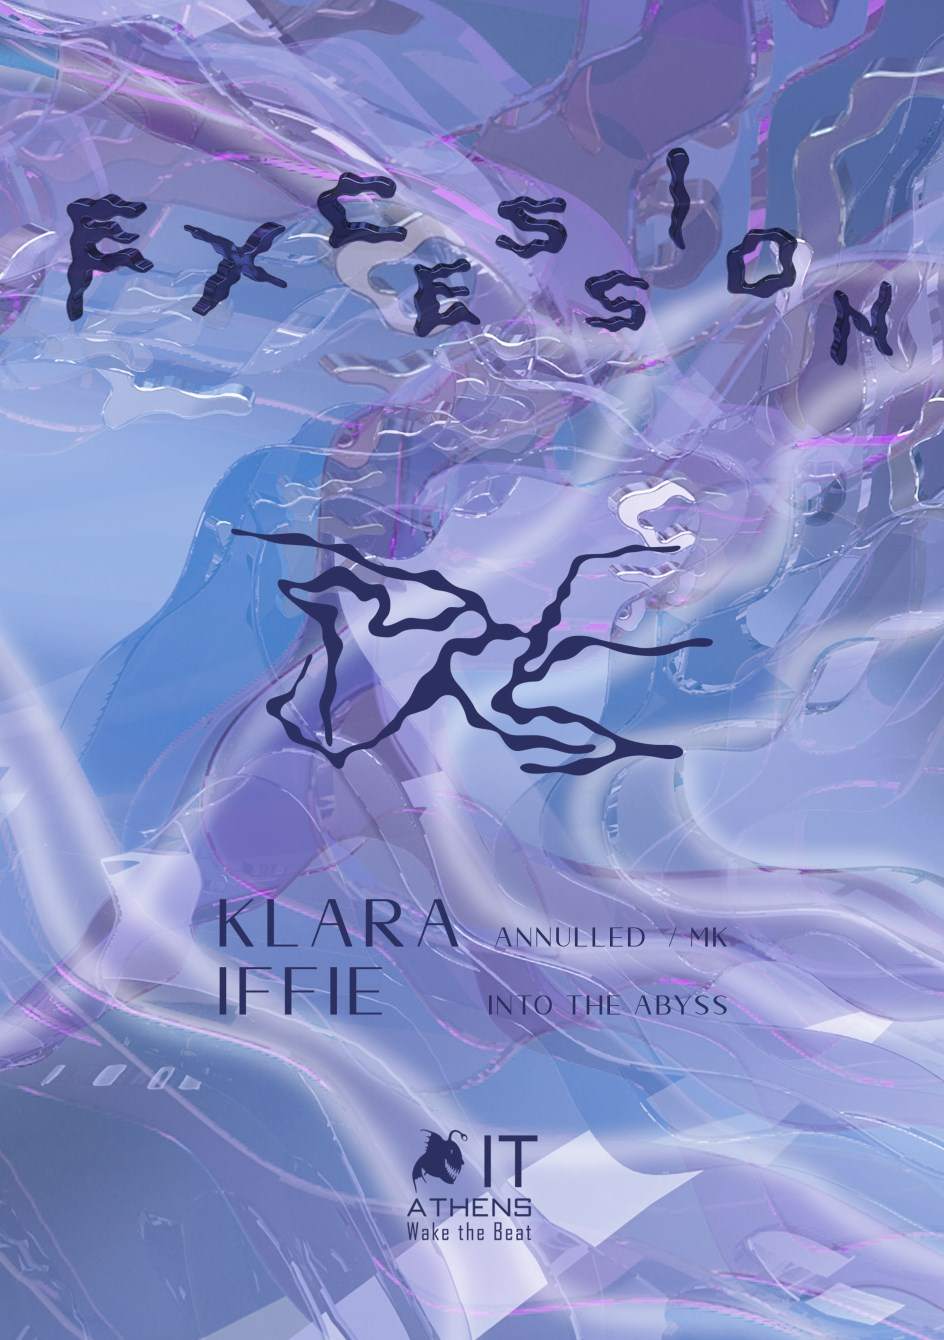 Excession #01 with Klara [MK - Annulled] & Iffie [Into The Abyss] - Página frontal